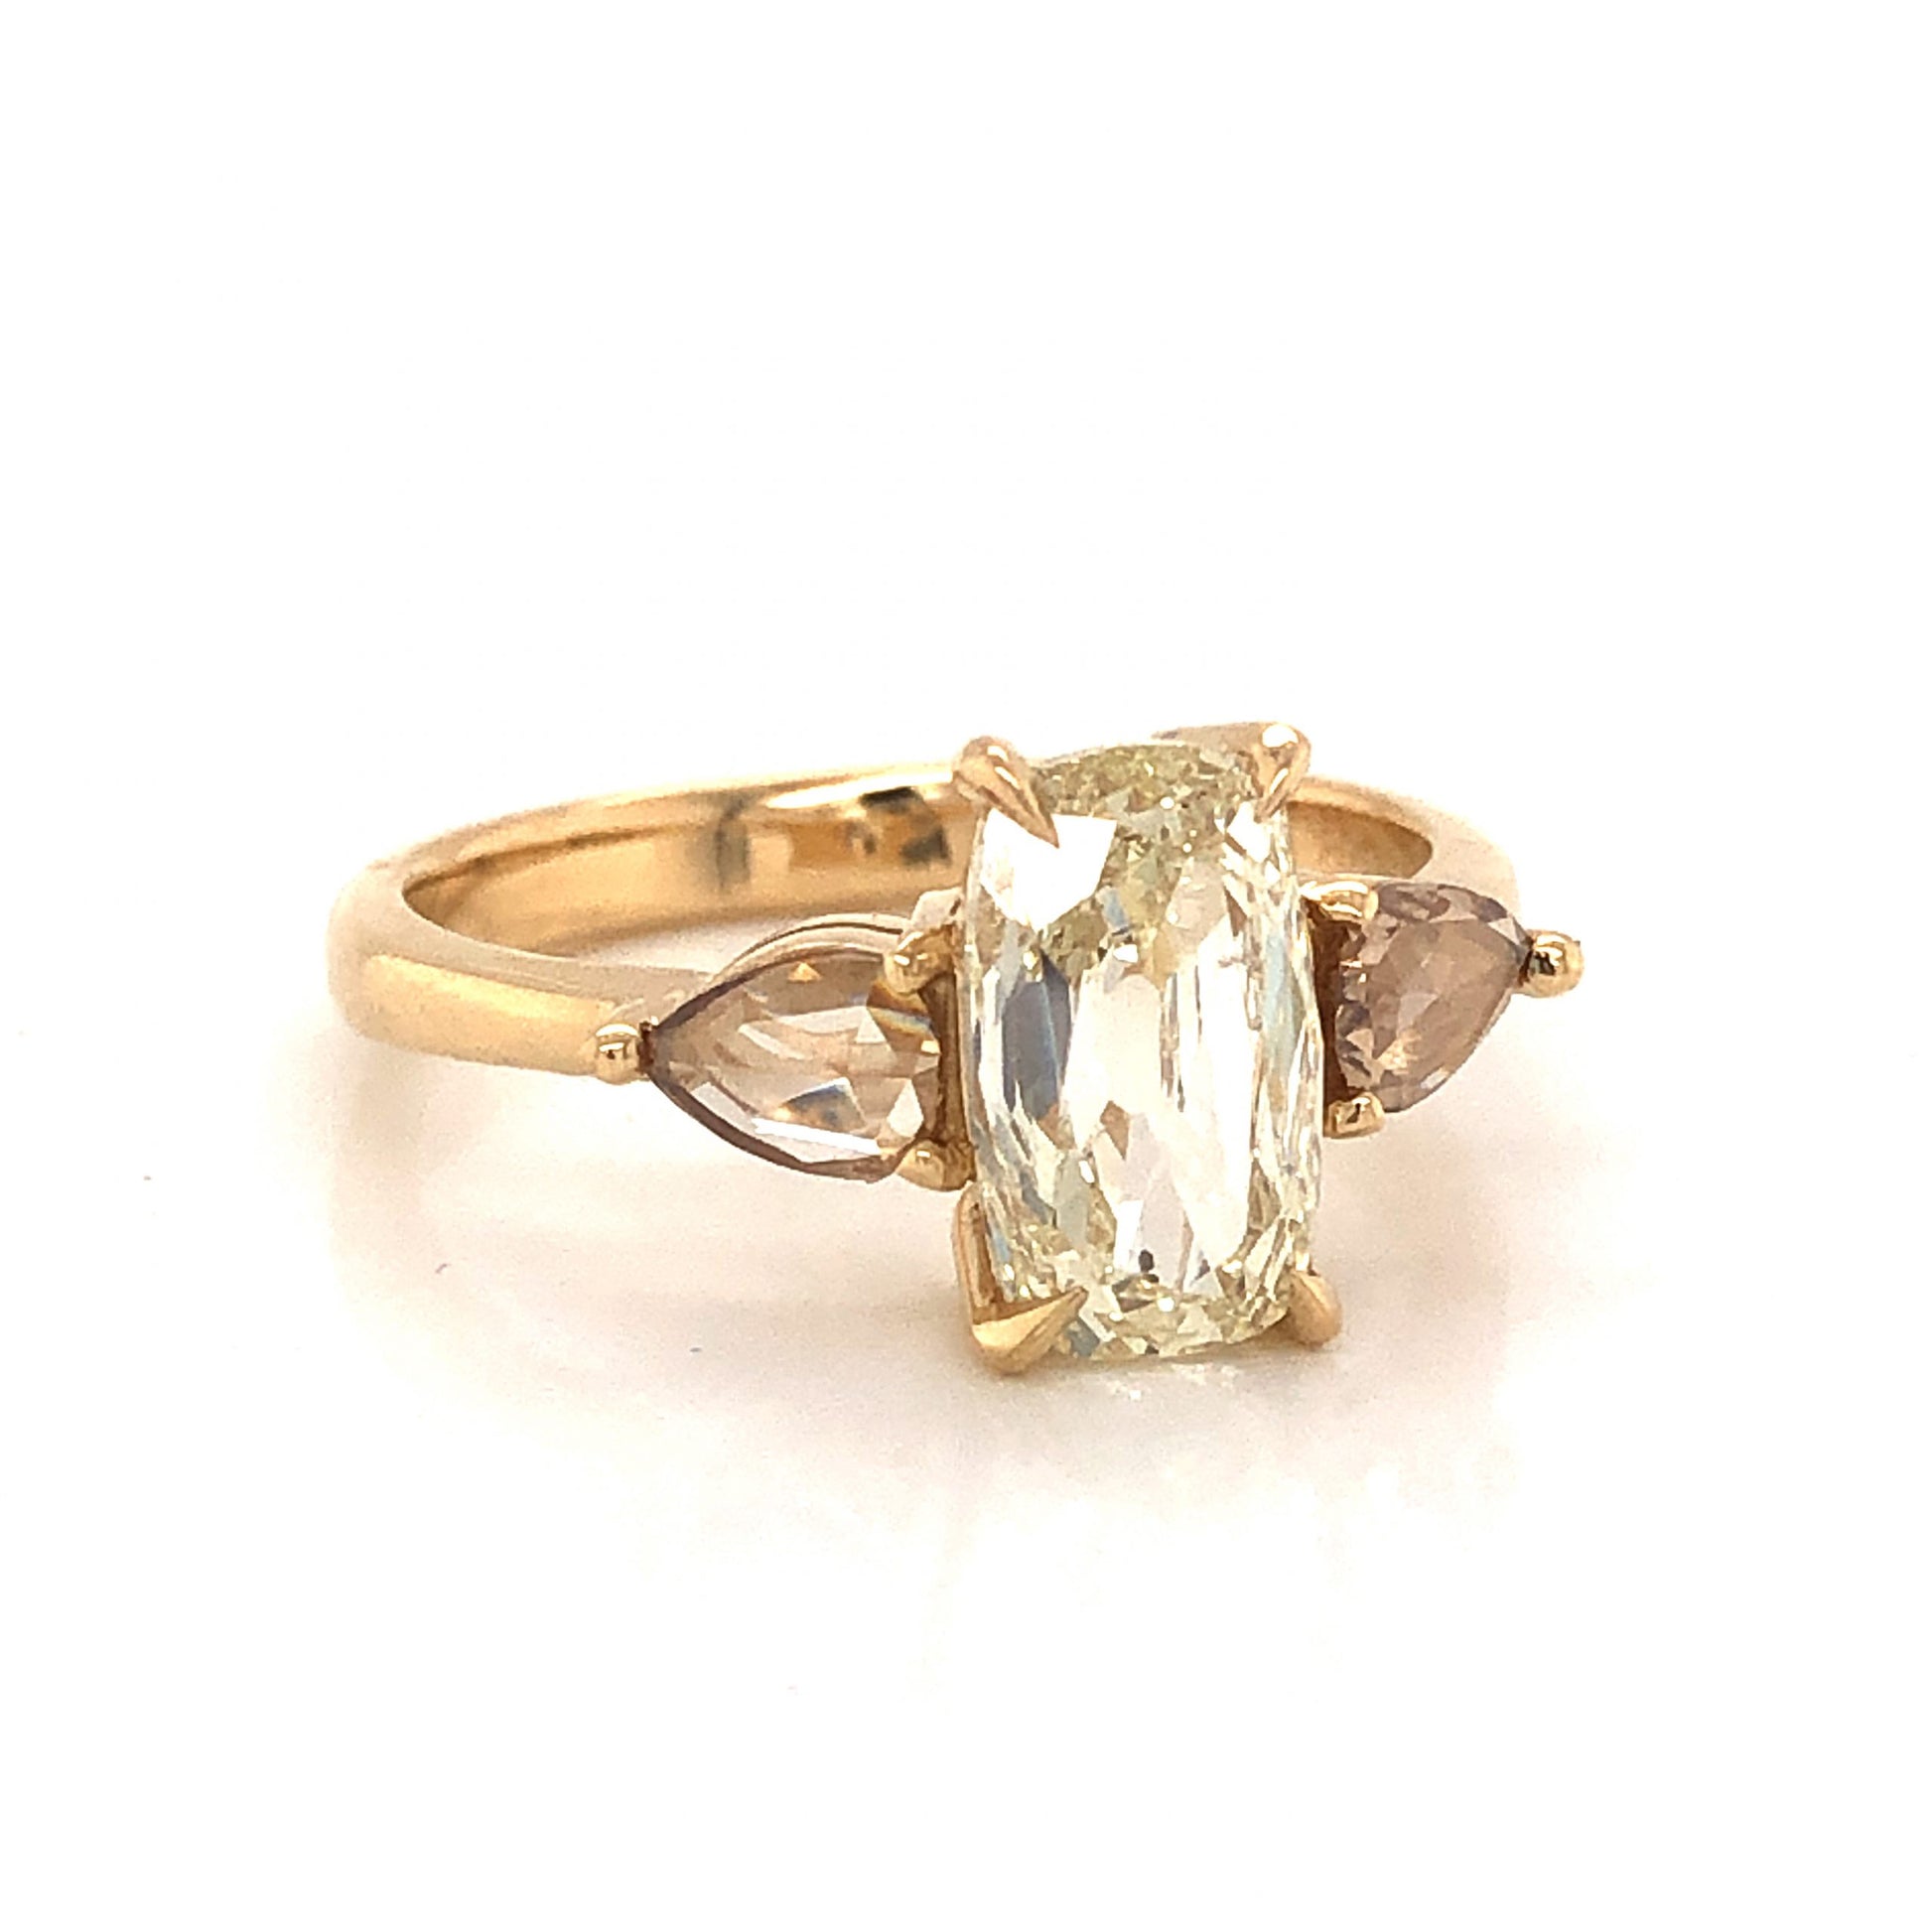 Old Mine Brilliant Cut Diamond Engagement Ring in 14k Yellow GoldComposition: 14 Karat Yellow Gold Ring Size: 6.25 Total Diamond Weight: 1.68ct Total Gram Weight: 3.3 g Inscription: 14k 
      